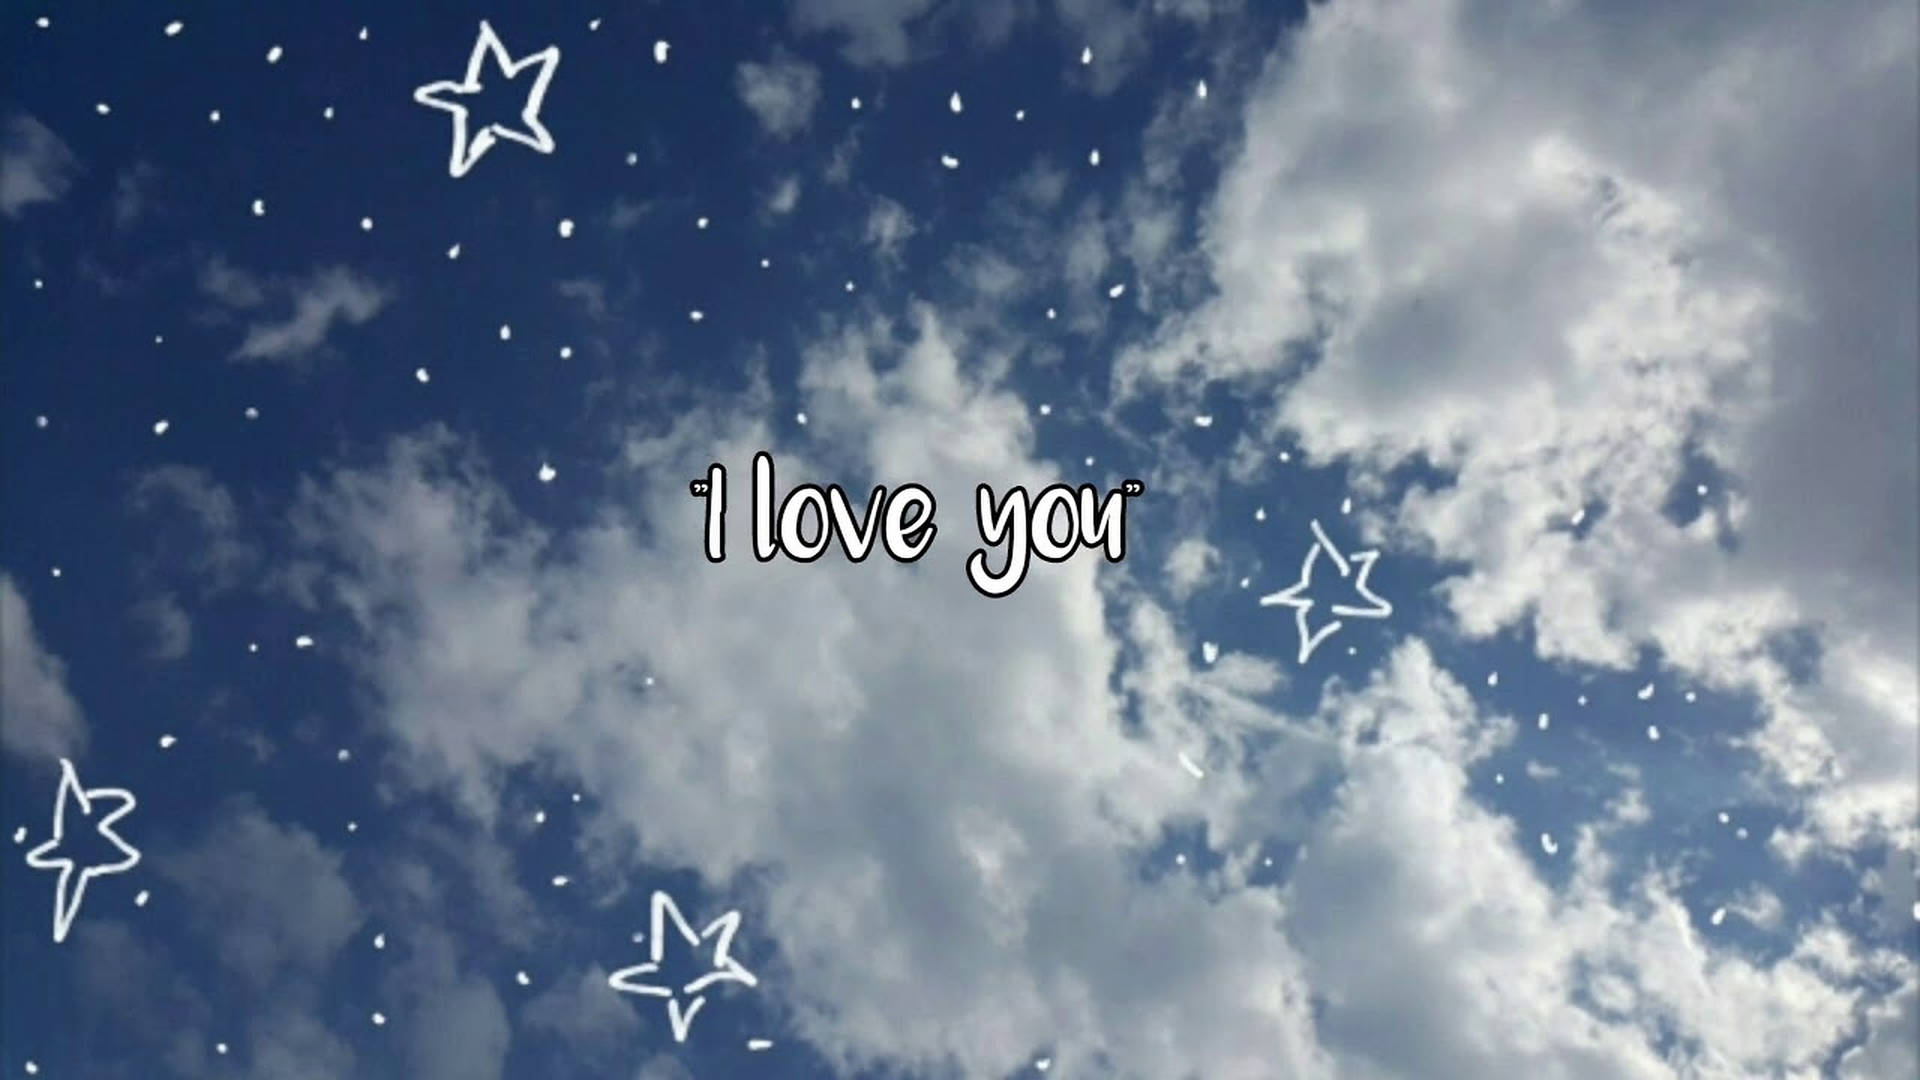 Free I Love You Wallpaper Downloads, [100+] I Love You Wallpapers for FREE  